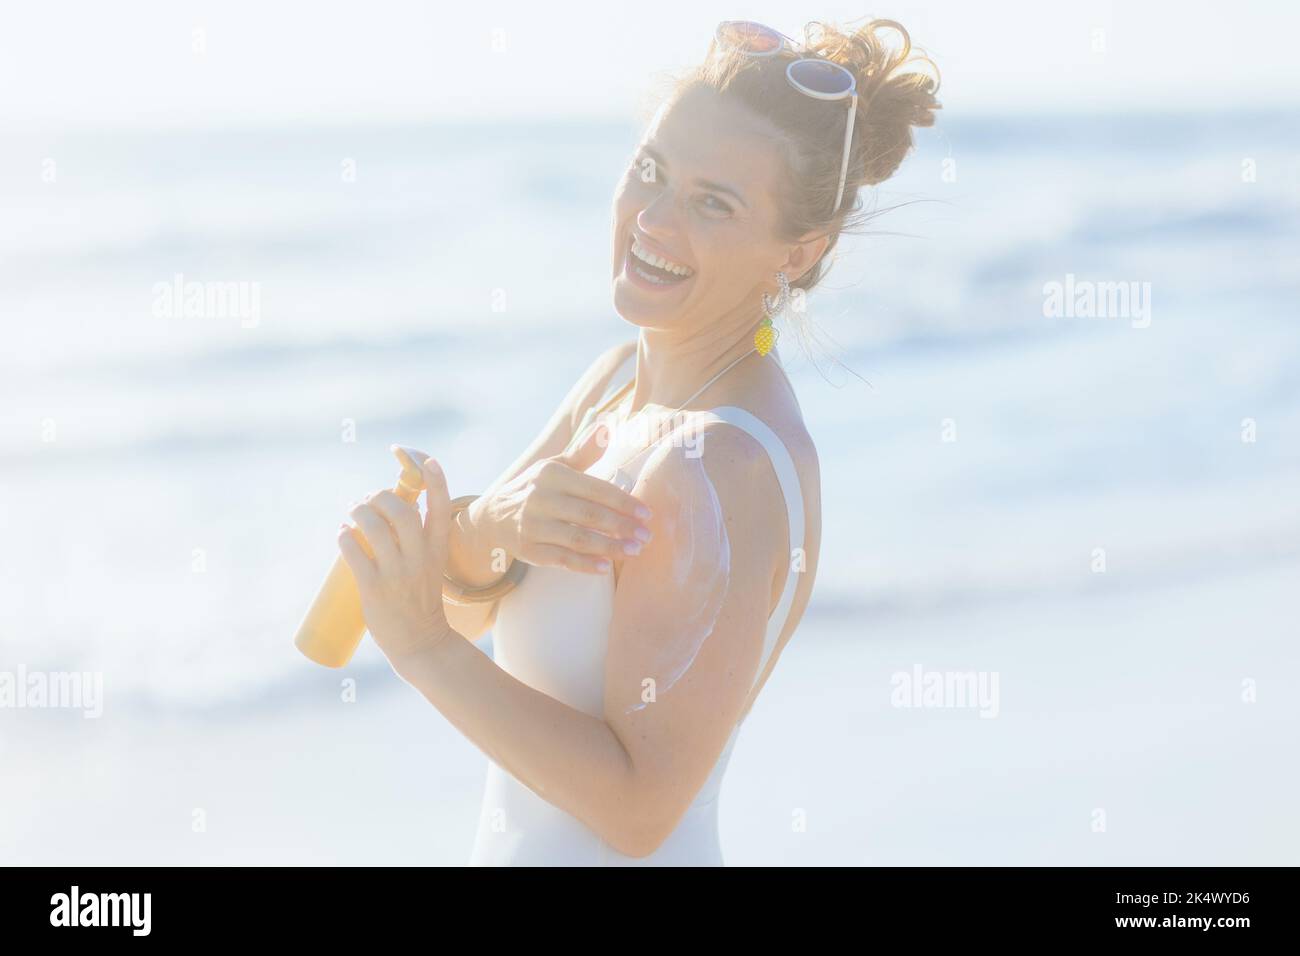 Portrait of happy elegant woman in white beachwear with sunscreen at the beach. Stock Photo